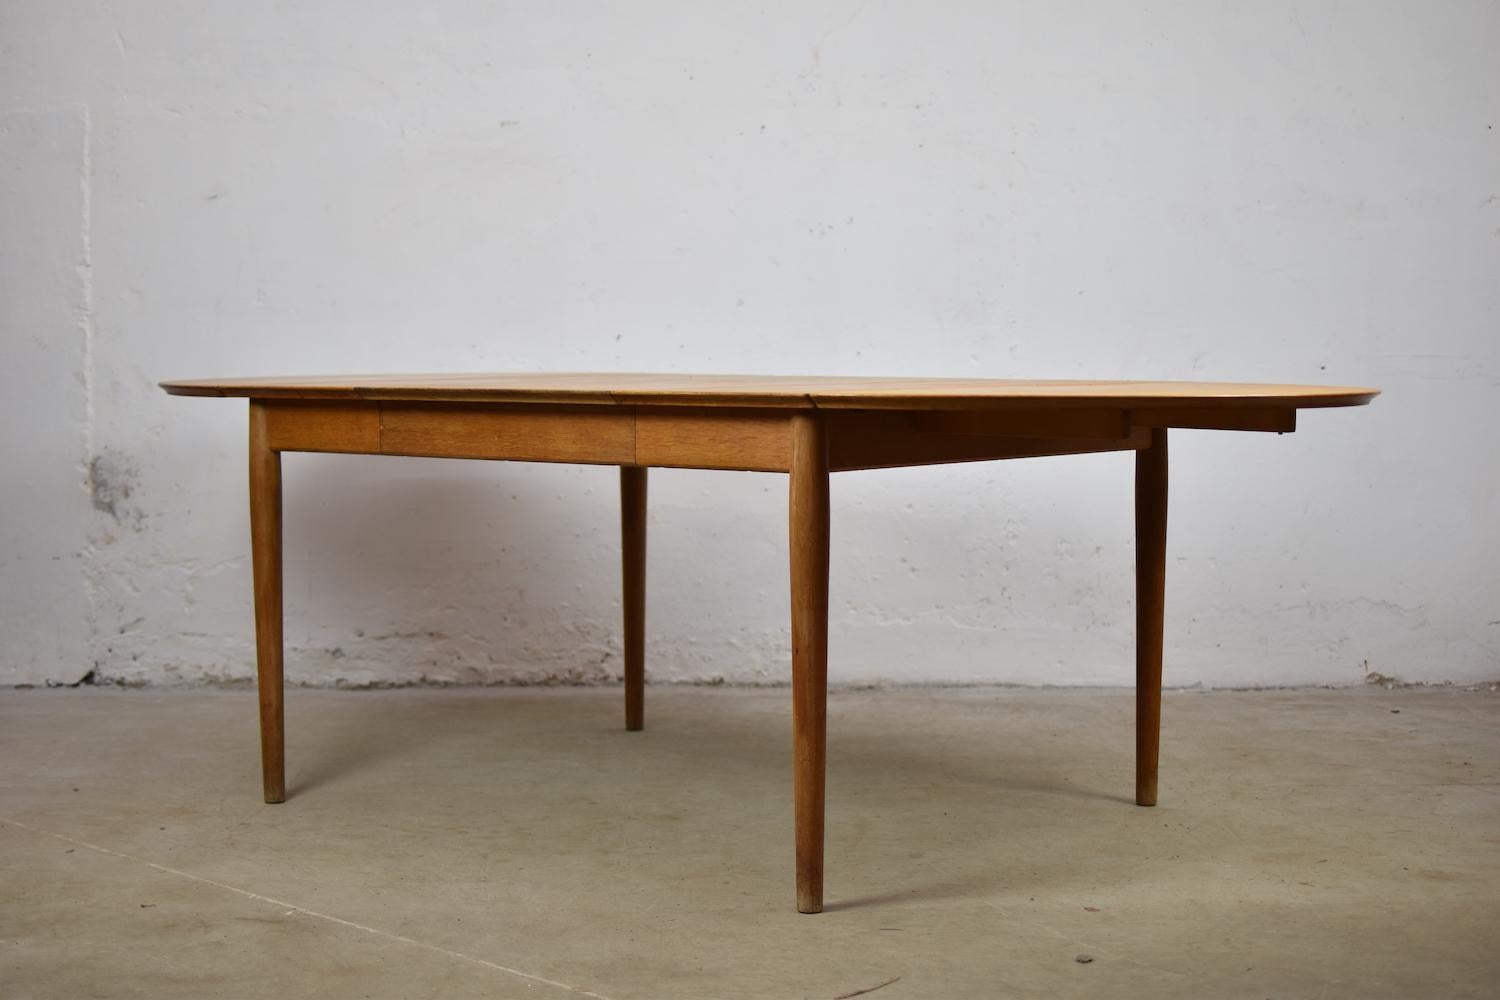 Lovely drop-leaf dining table by Arne Vodder for Sibast, Denmark 1950s. This is model 227, made out of oak (!) and features one extension in the middle. Some visible signs of age and wear, but overall in very good condition. Pure Classic Danish